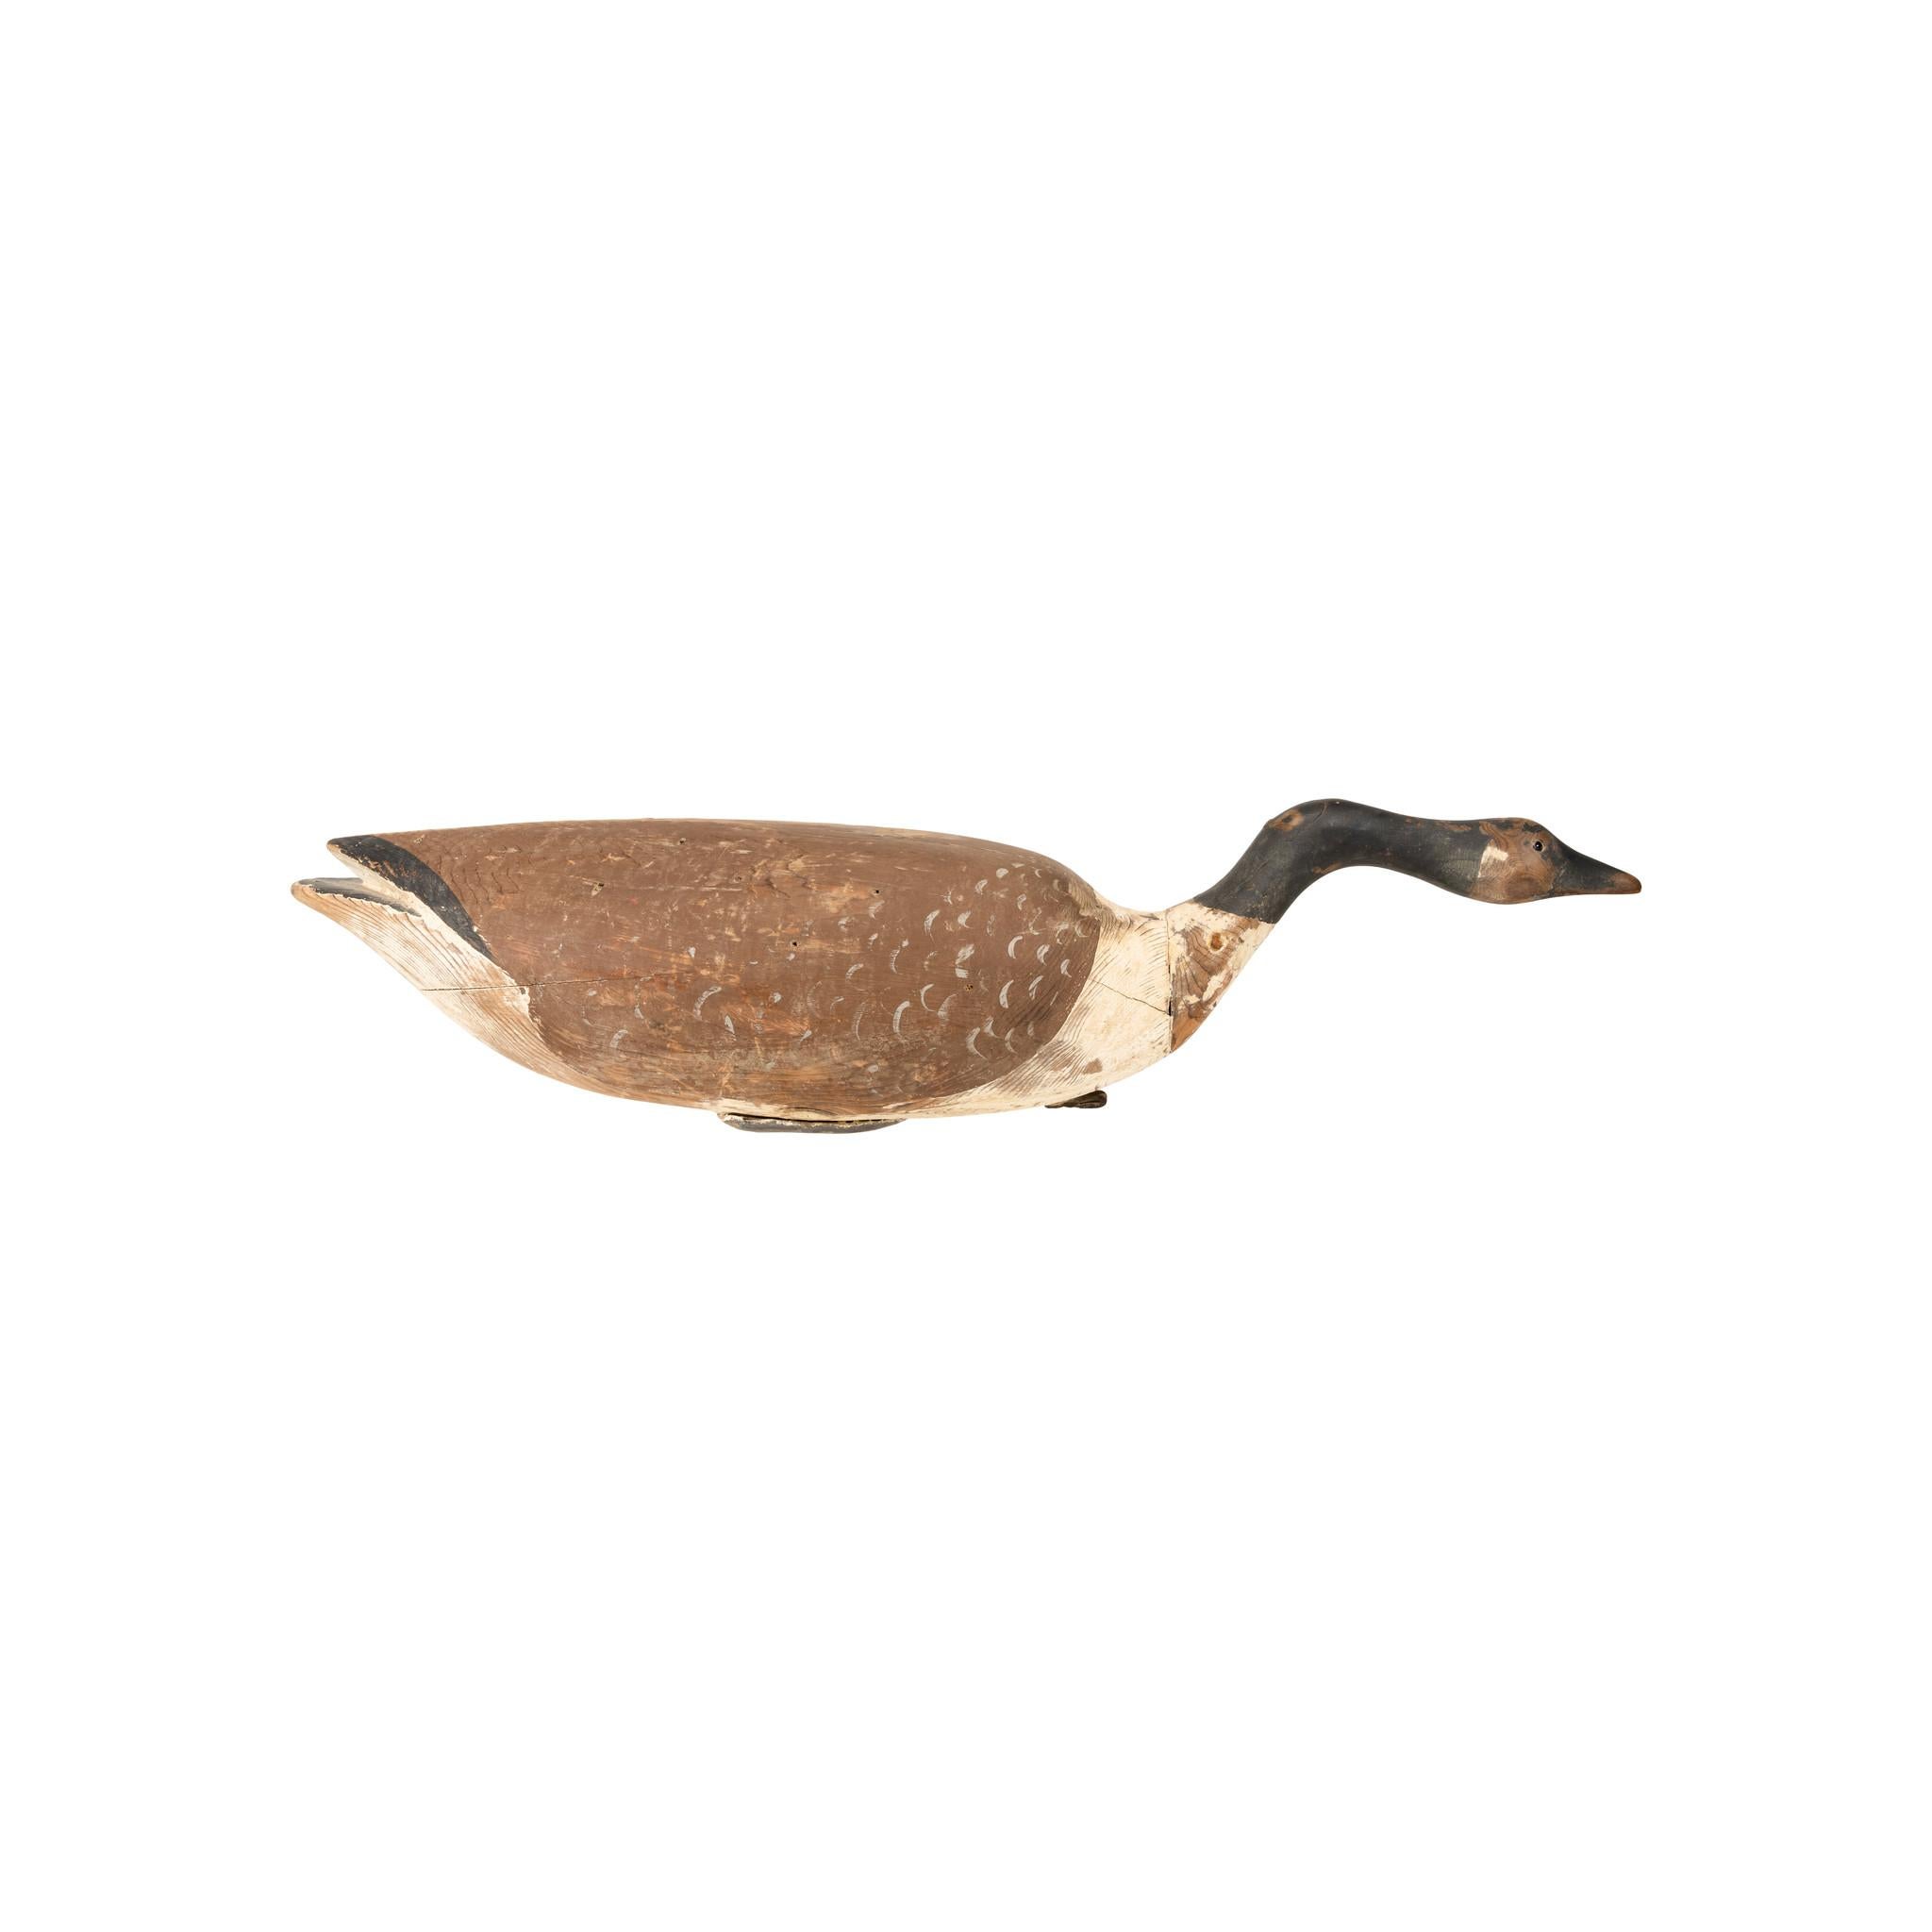 Hollow-carved Canada Goose decoy by Nathan Cobb Jr, with applied neck and head circa 1880-1895. This decoy features a 33” L x 7 ½” W two-piece hand-scooped and drilled hollow body, constructed with both cut nails (square nails) and wire nails, a